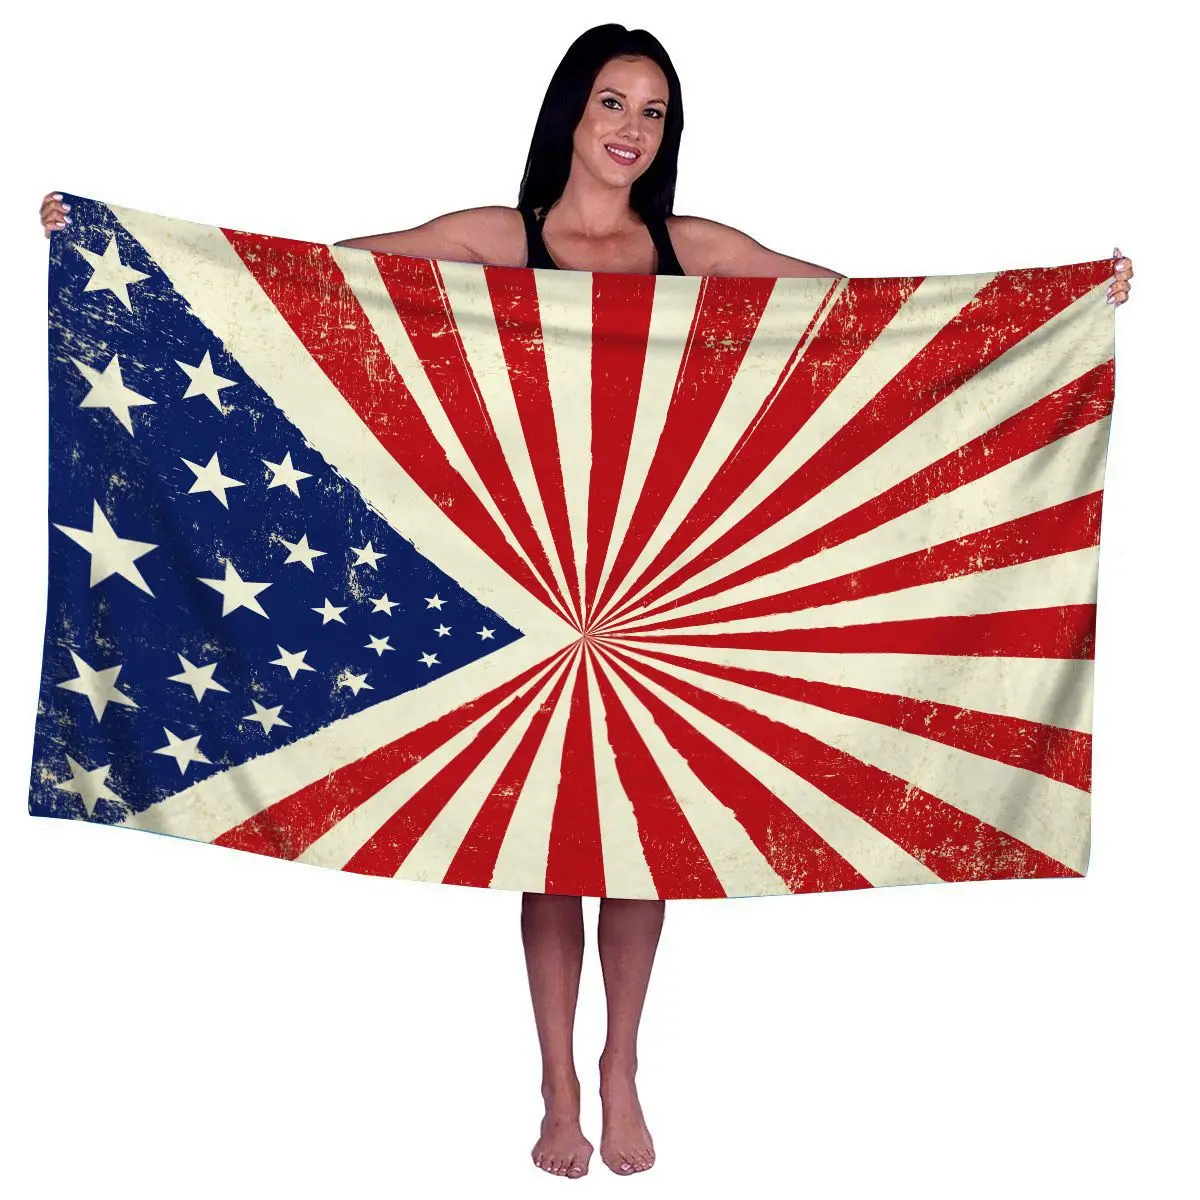 Raainhao Bald Eagle and American Flag USA Beach Towel Oversized Quick Dry Beach Towel for Travel Hippie Microfiber Polyester 